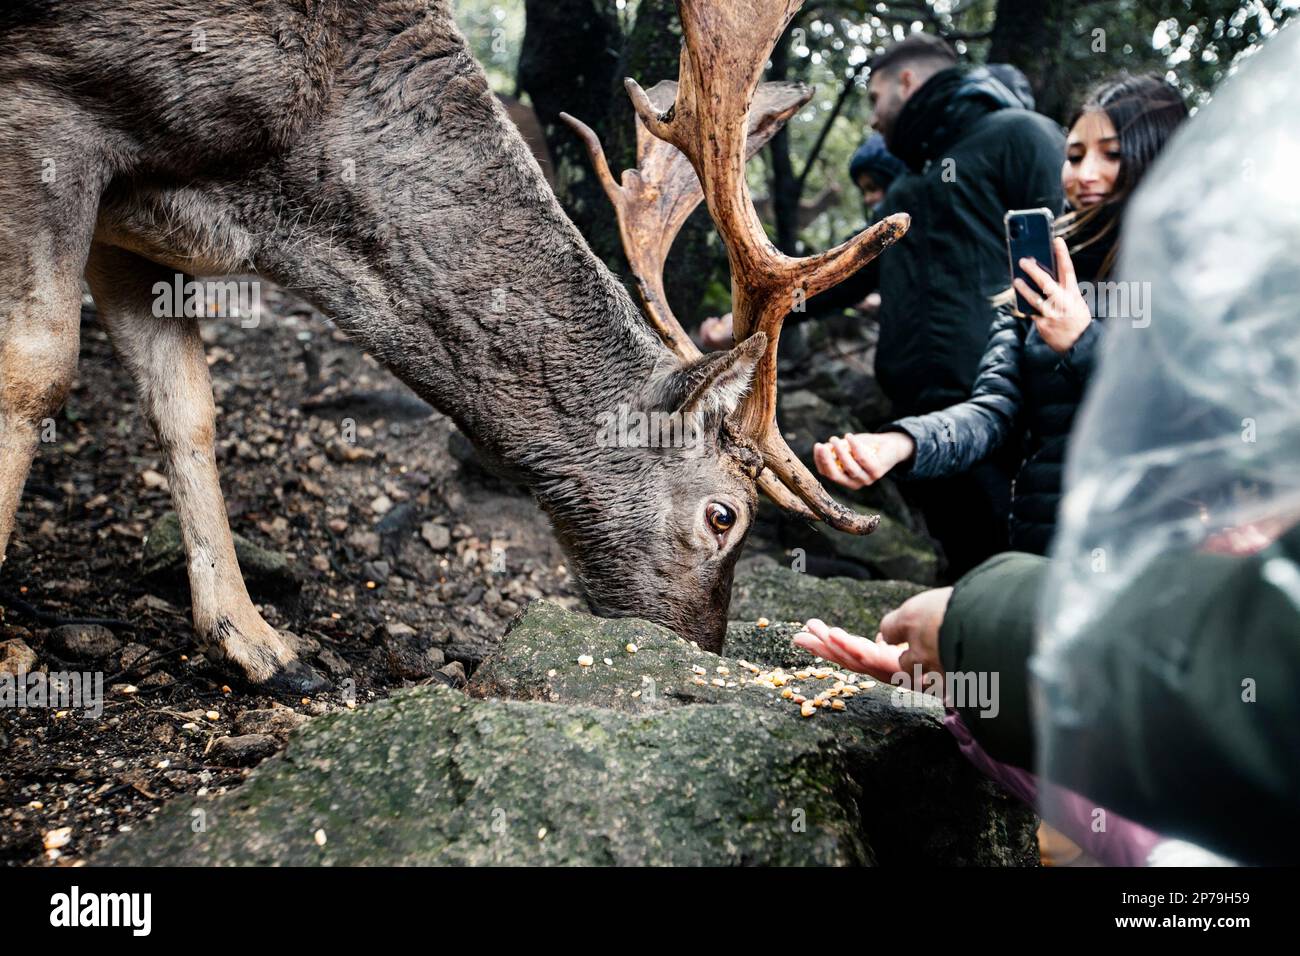 A girl feeds a semi-wild buck of fallow deer while taking its picture with her phone. Stock Photo